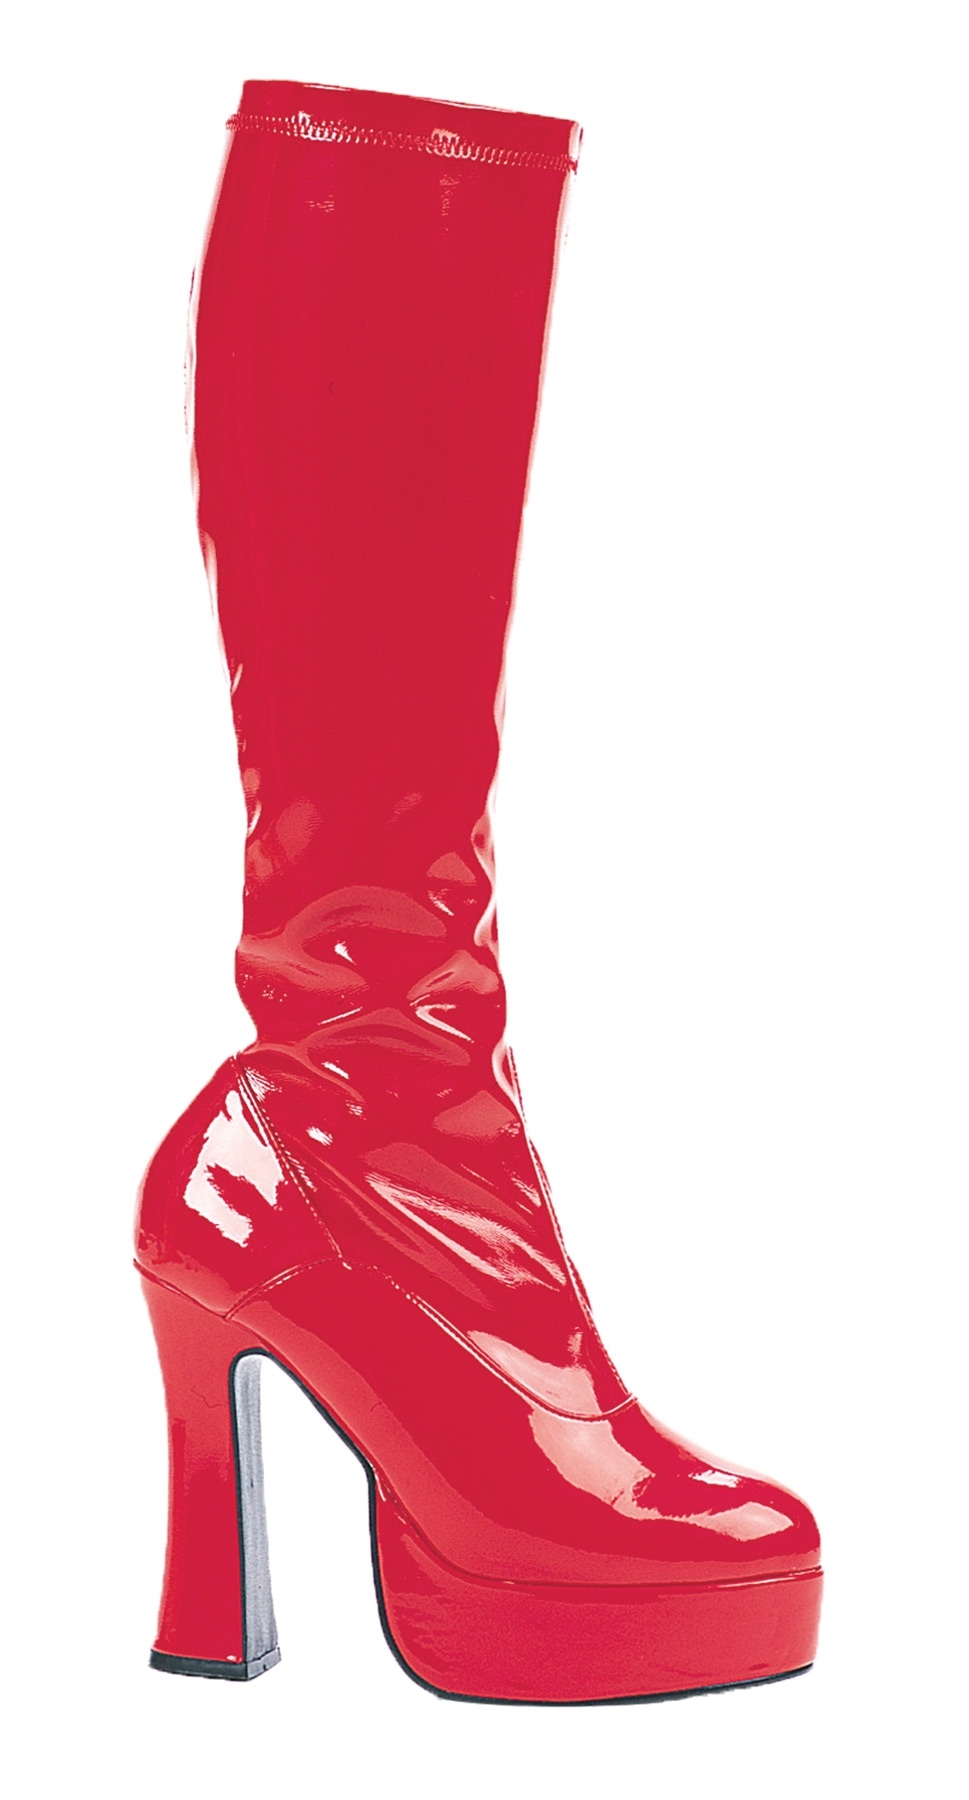 BOOT CHACHA RED GoGo Platform Adult